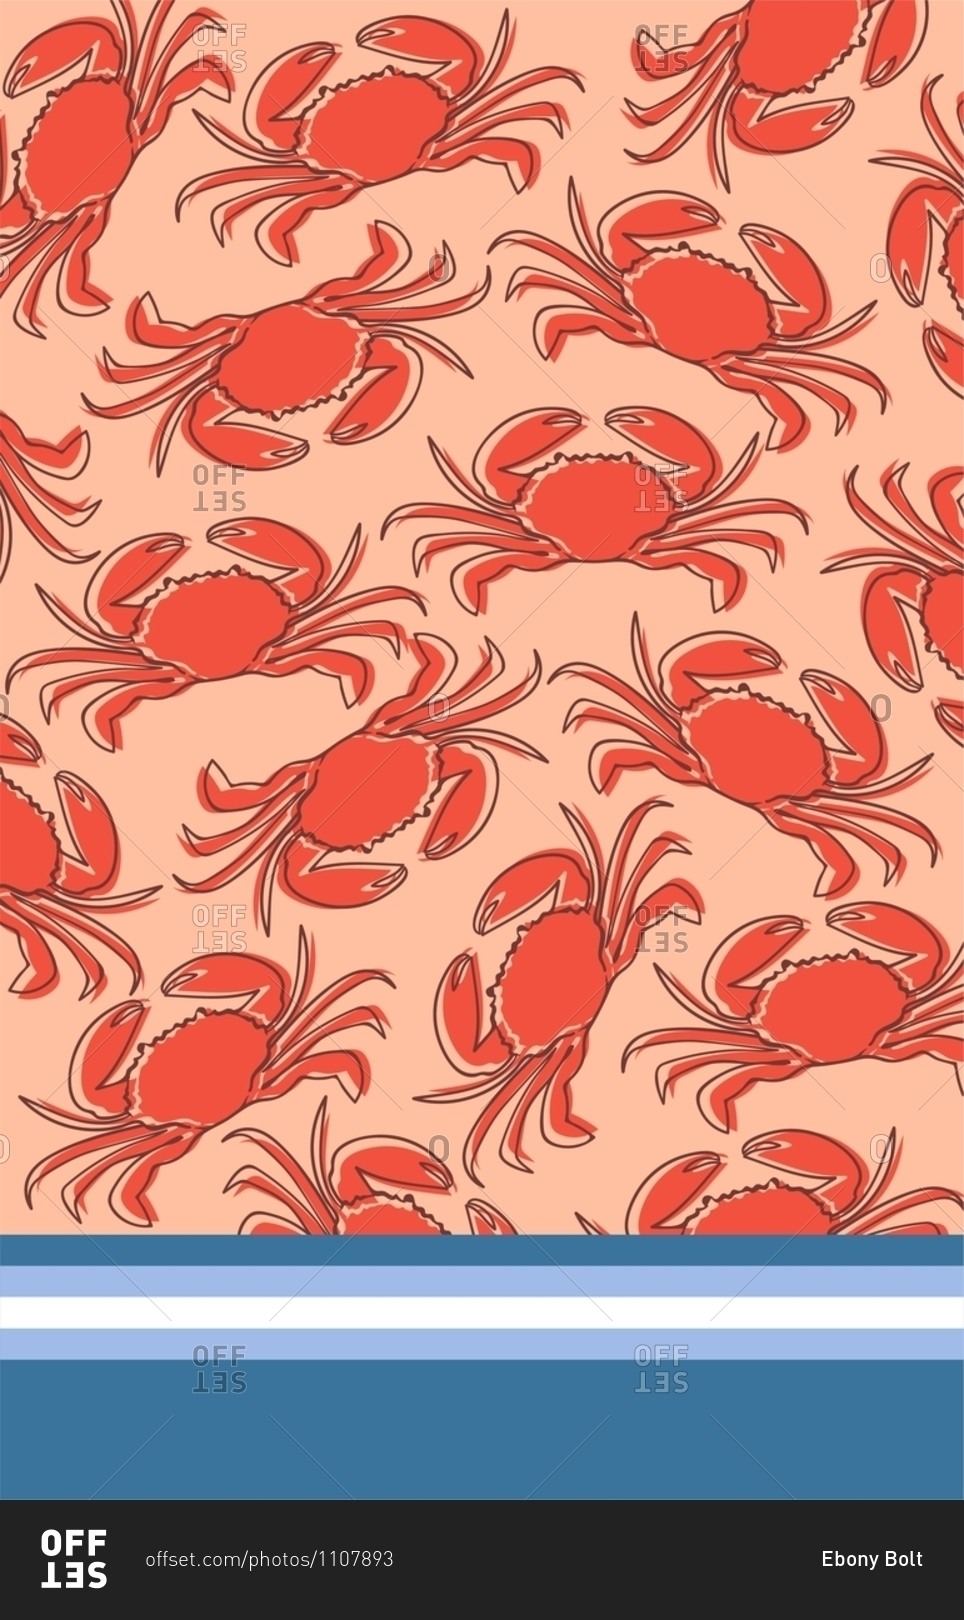 Crab motifs in a tossed layout with a contrasting border\
stock photo - OFFSET